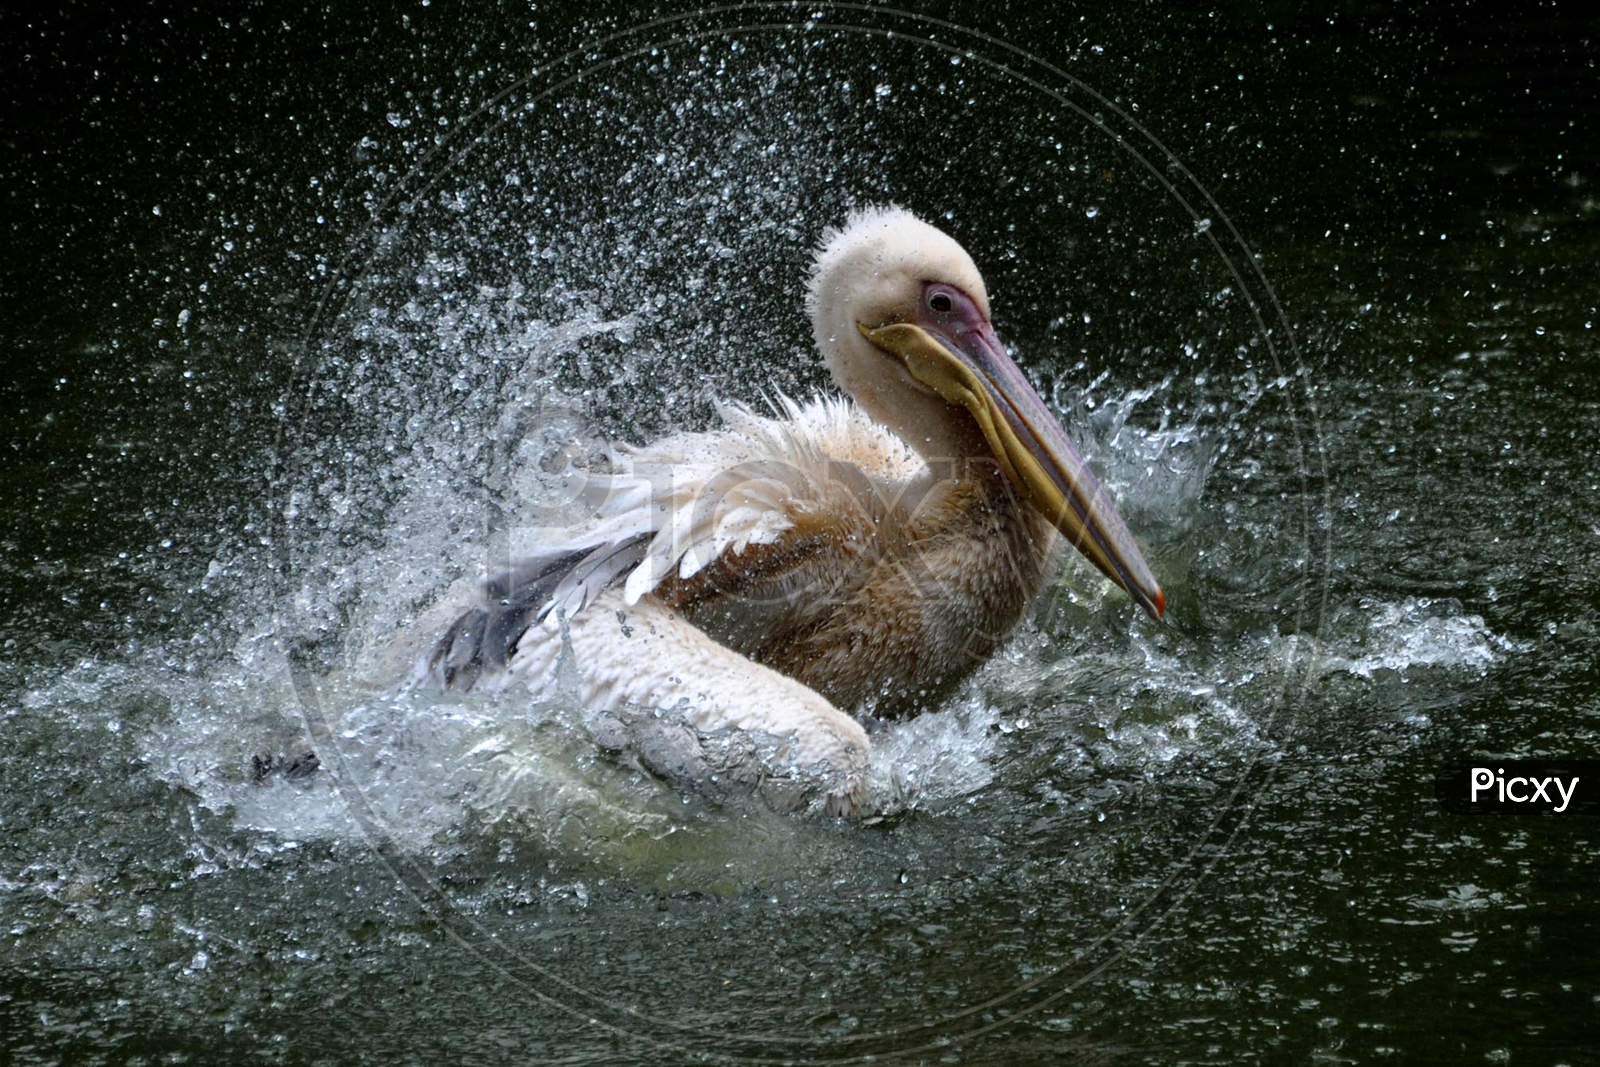 A rosy pelican swims in a pond inside an enclosure, at Assam State Zoo cum Botanical Garden in Guwahati, Tuesday, on August 4, 2020.